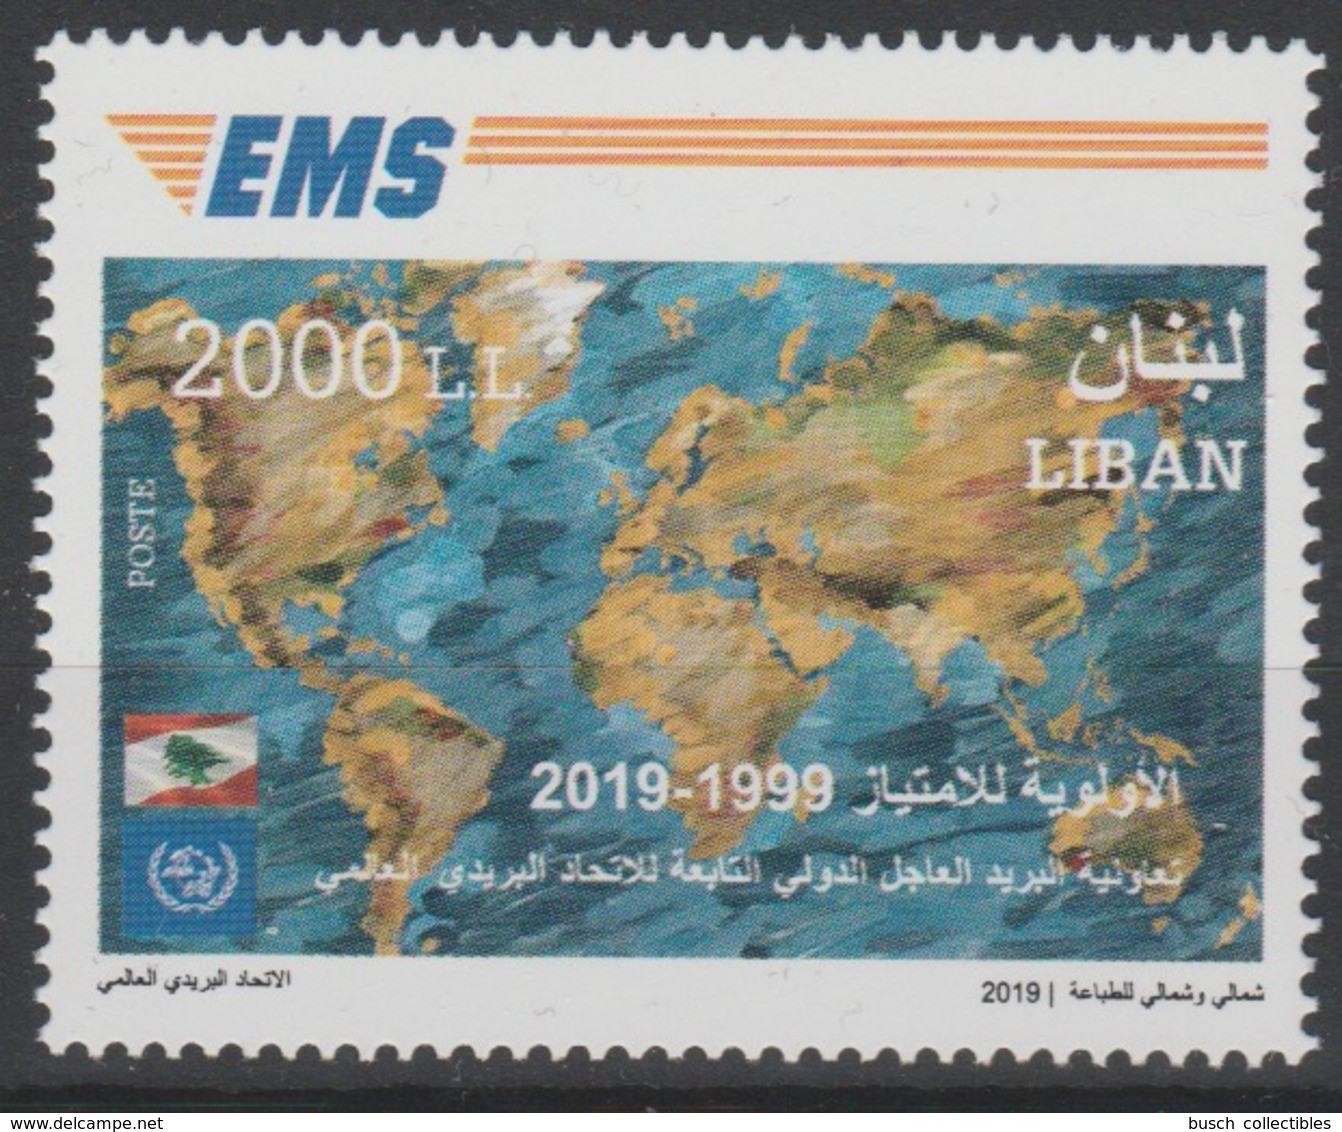 Liban Lebanon Libanon 2019 Mi. ? Joint Issue 20e Anniversaire EMS 20 Years Emission Commune E.M.S. UPU - Joint Issues